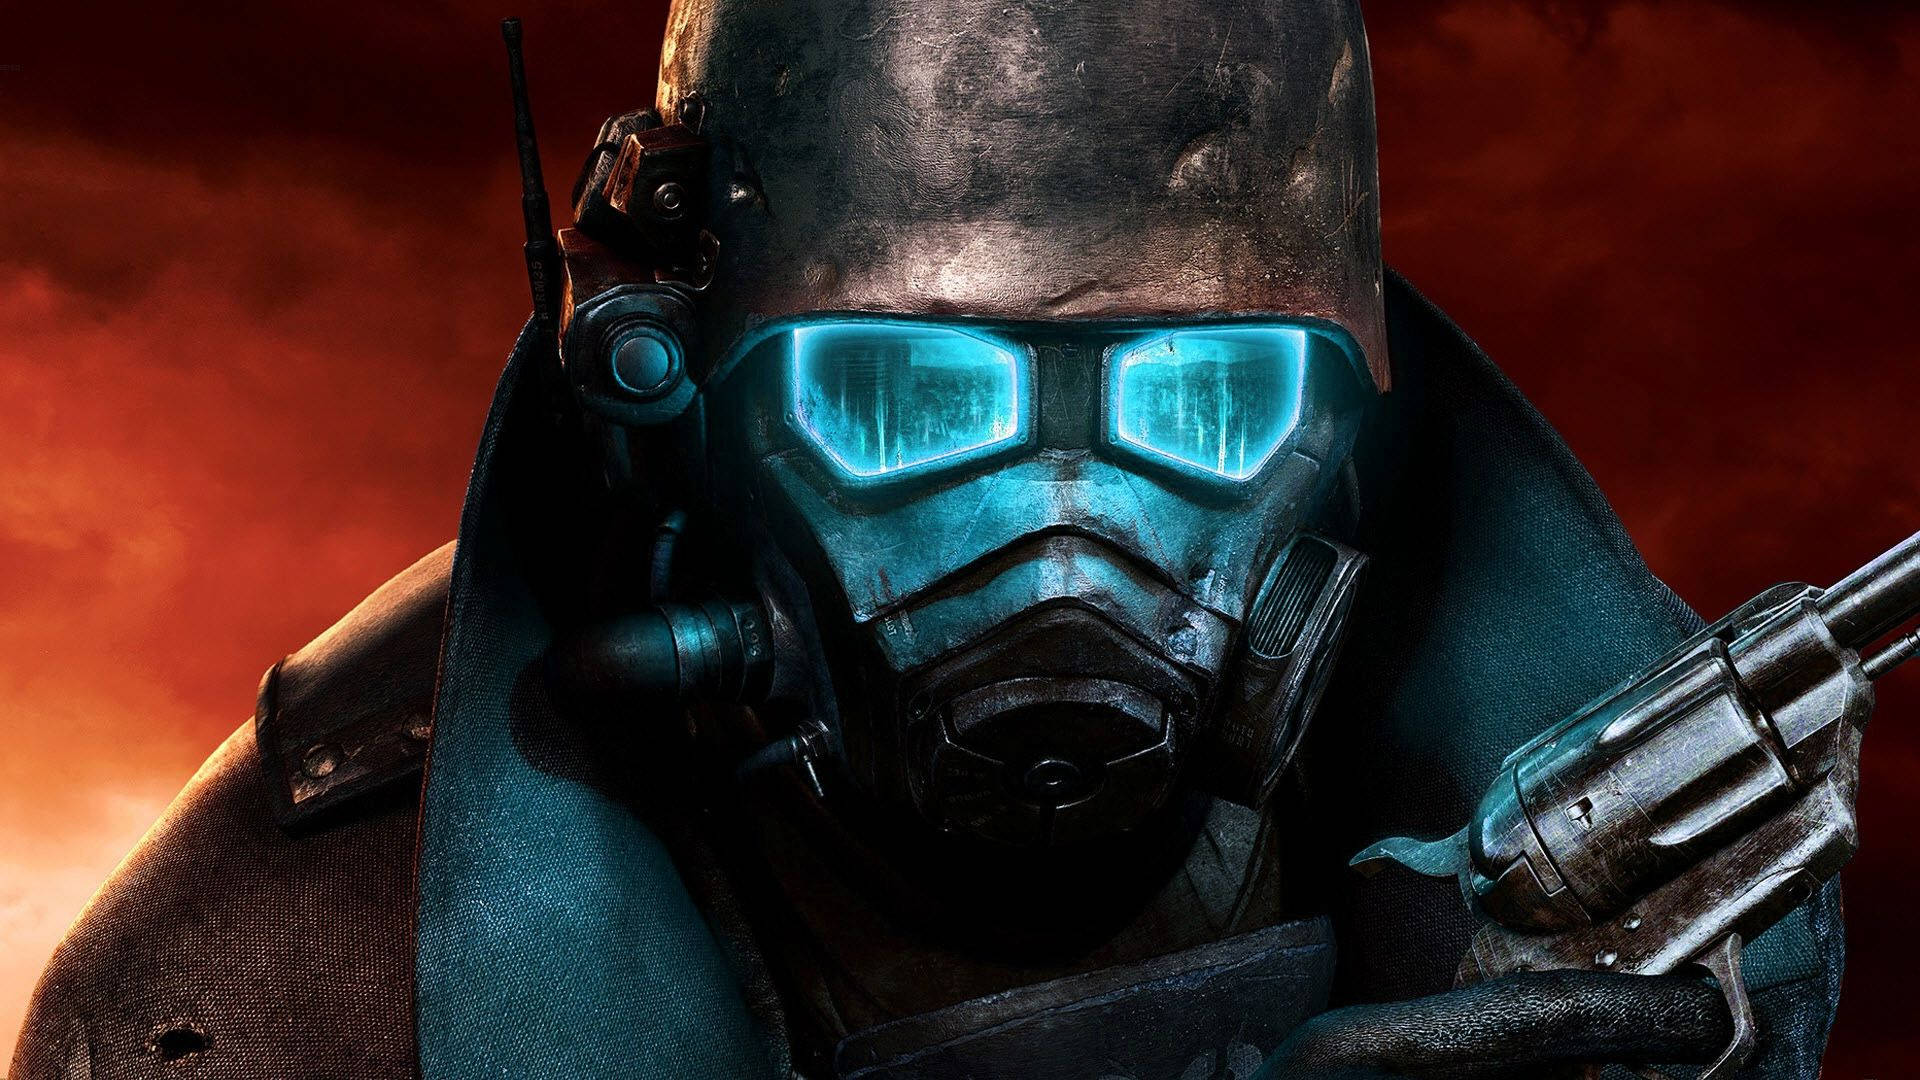 Explore the post-apocalyptic world of Fallout New Vegas Wallpaper